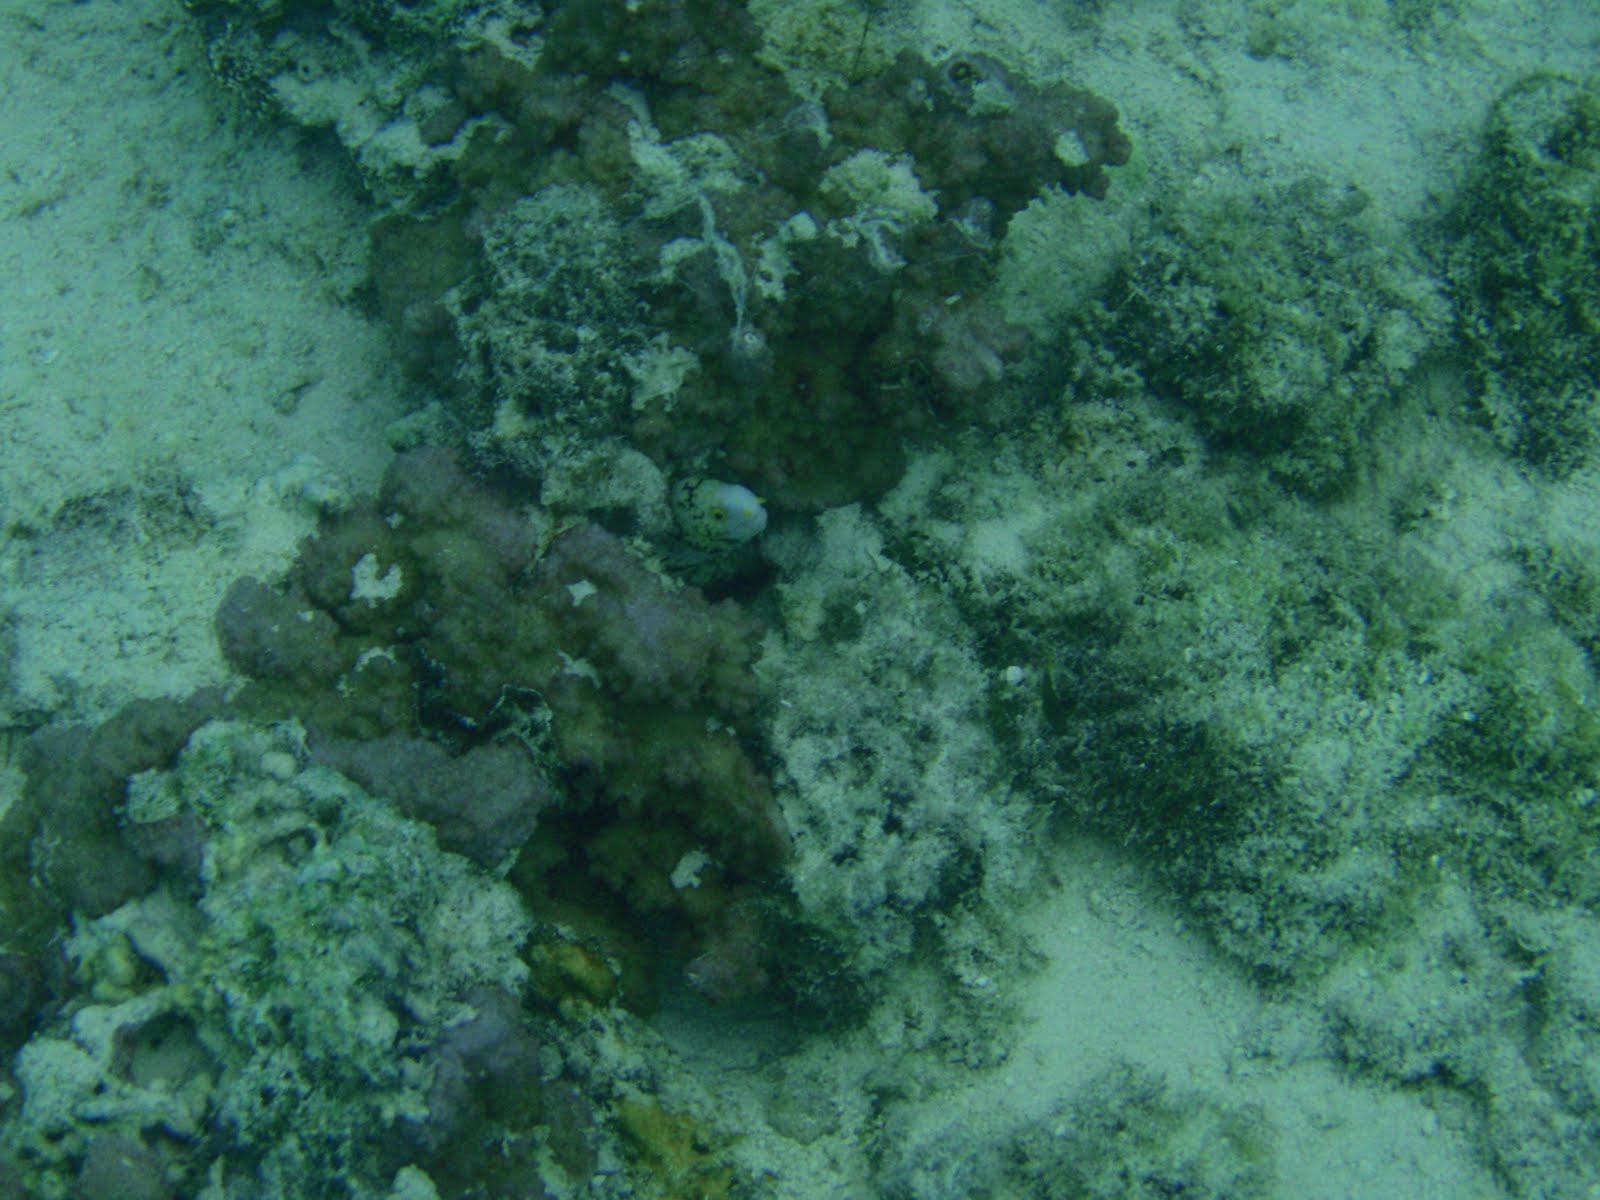 camouflaged eel peeking out from coral cluster